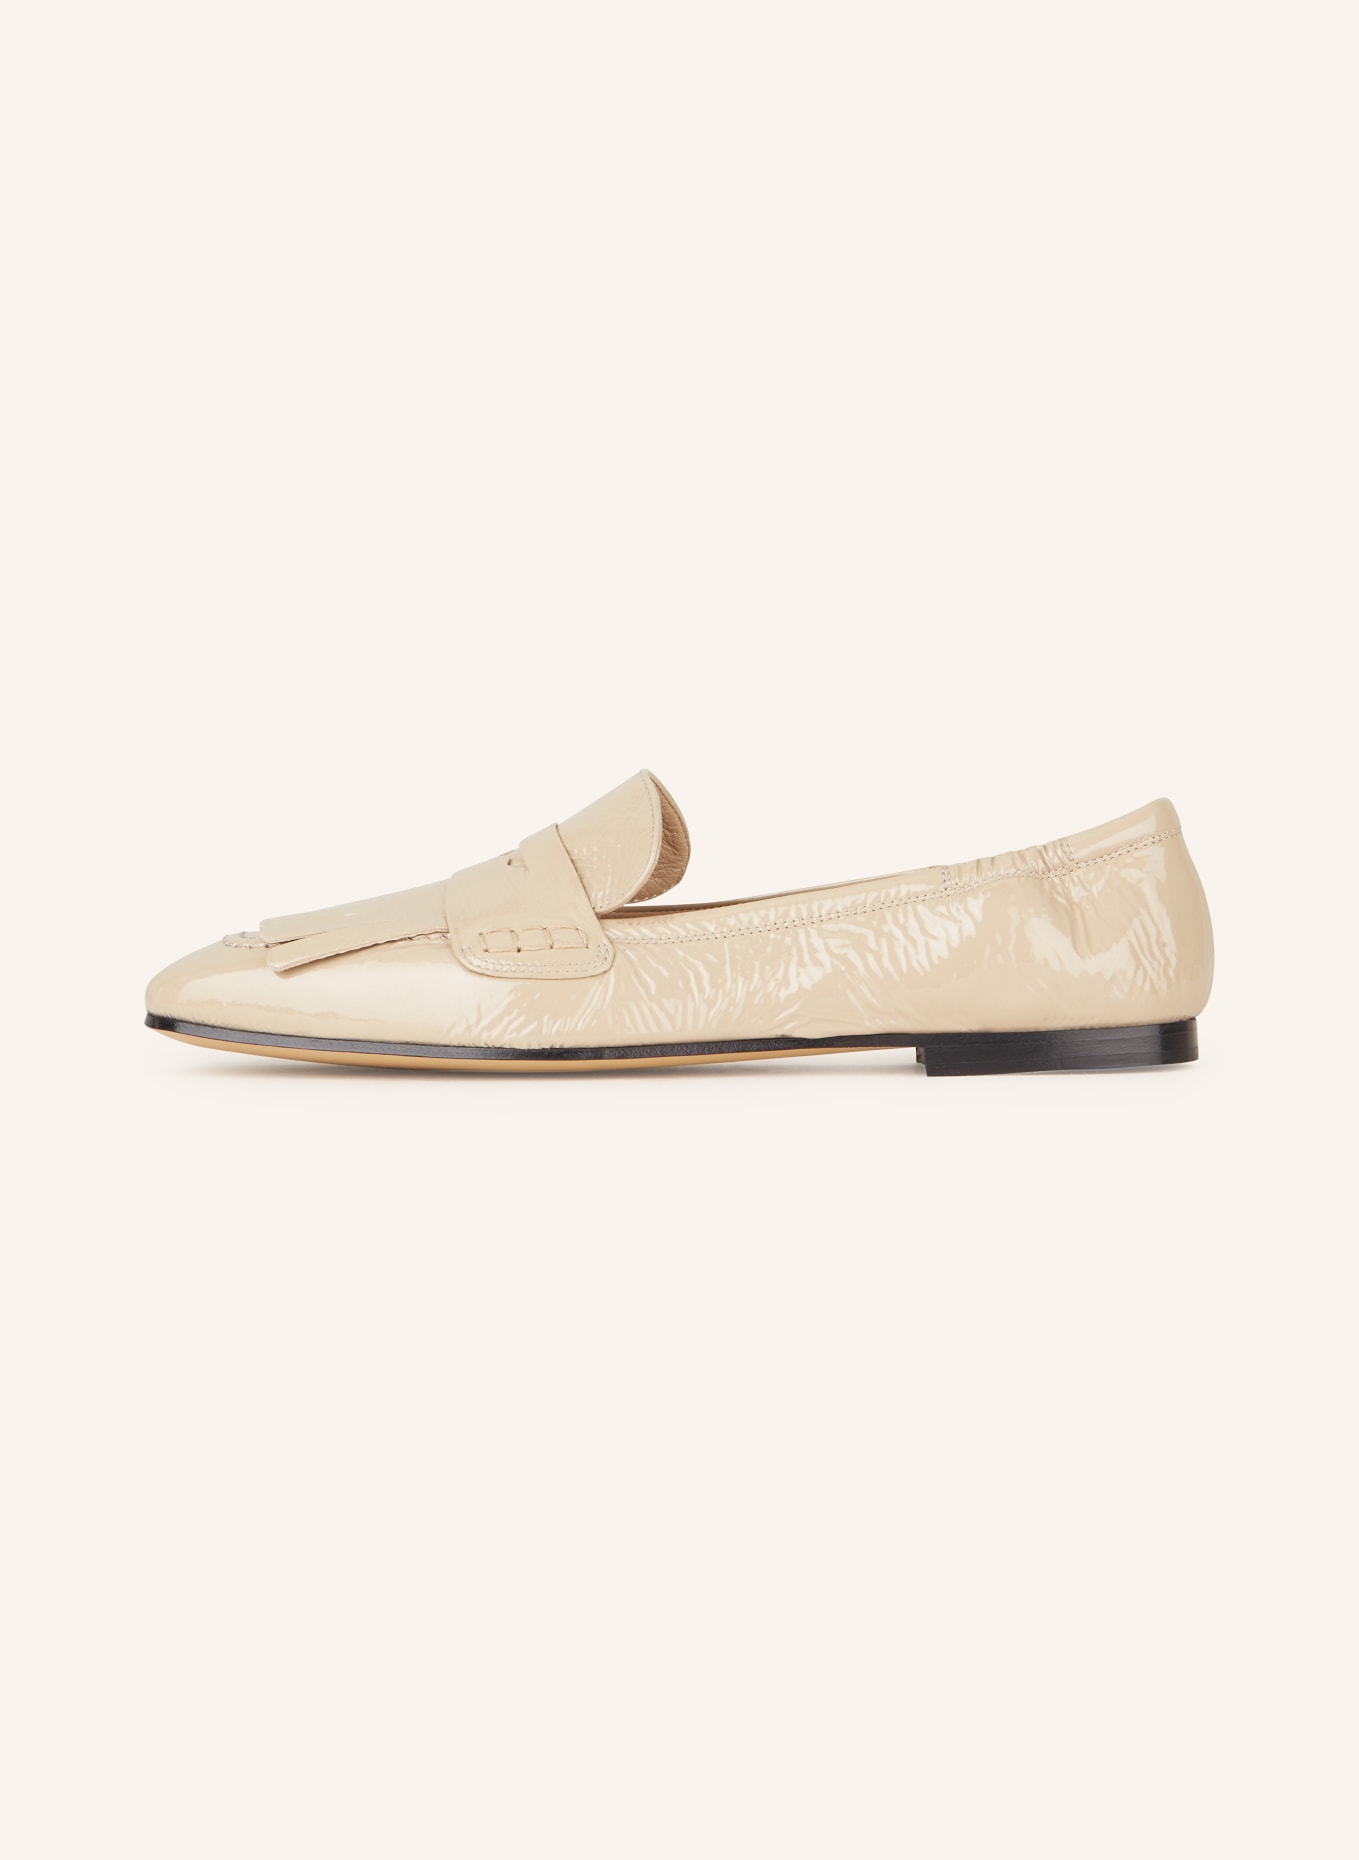 POMME D'OR Penny-Loafer ANGIE, Farbe: BEIGE (Bild 4)